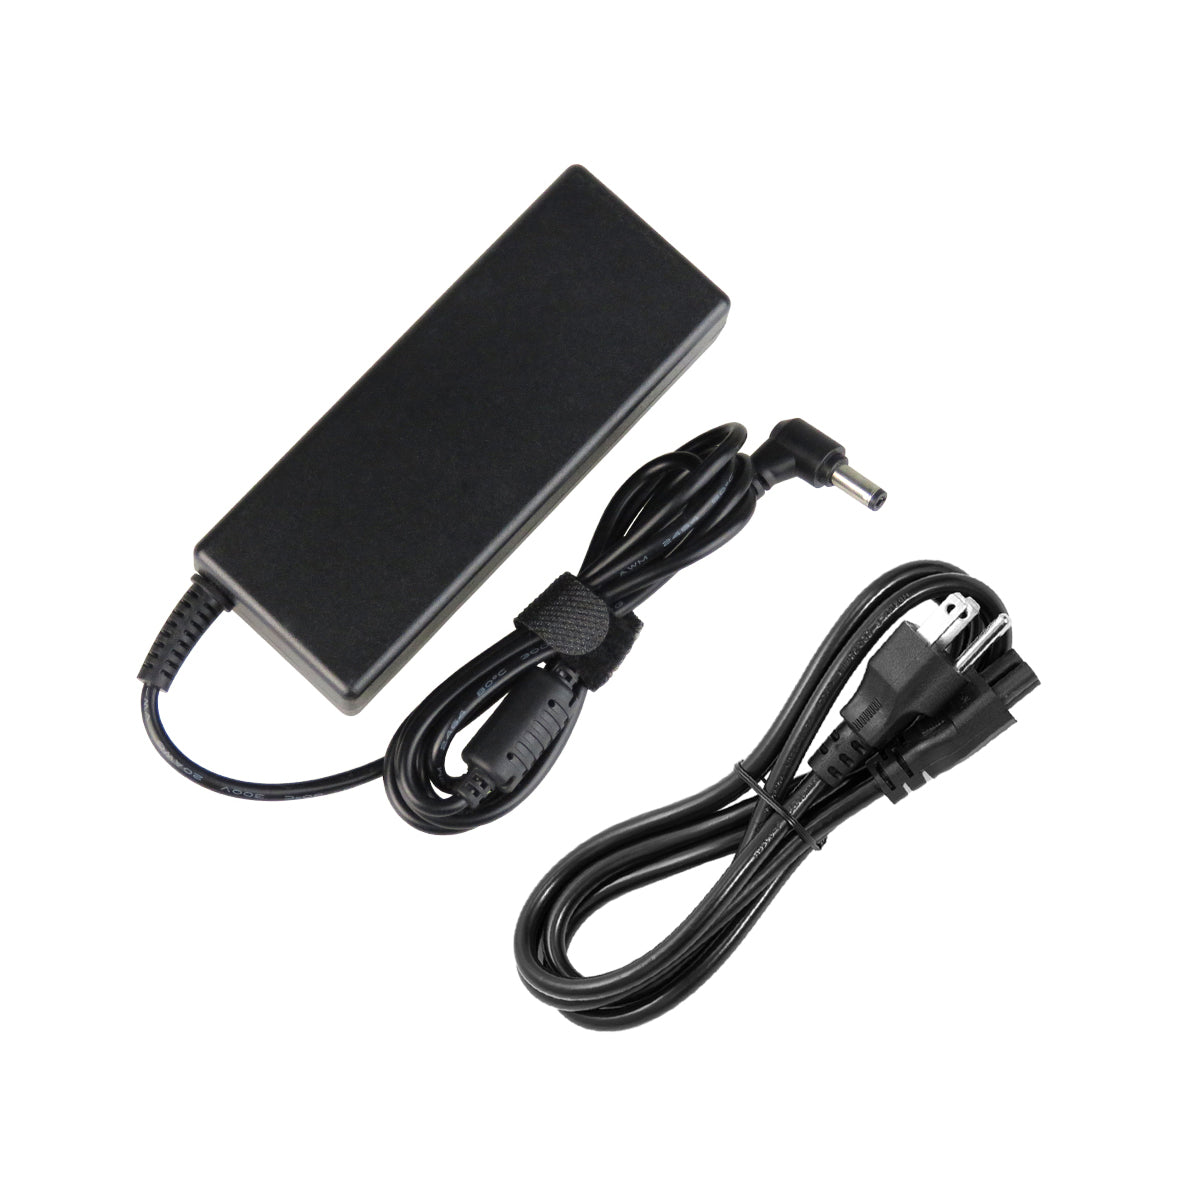 AC Adapter Charger for ASUS M60JV Notebook.